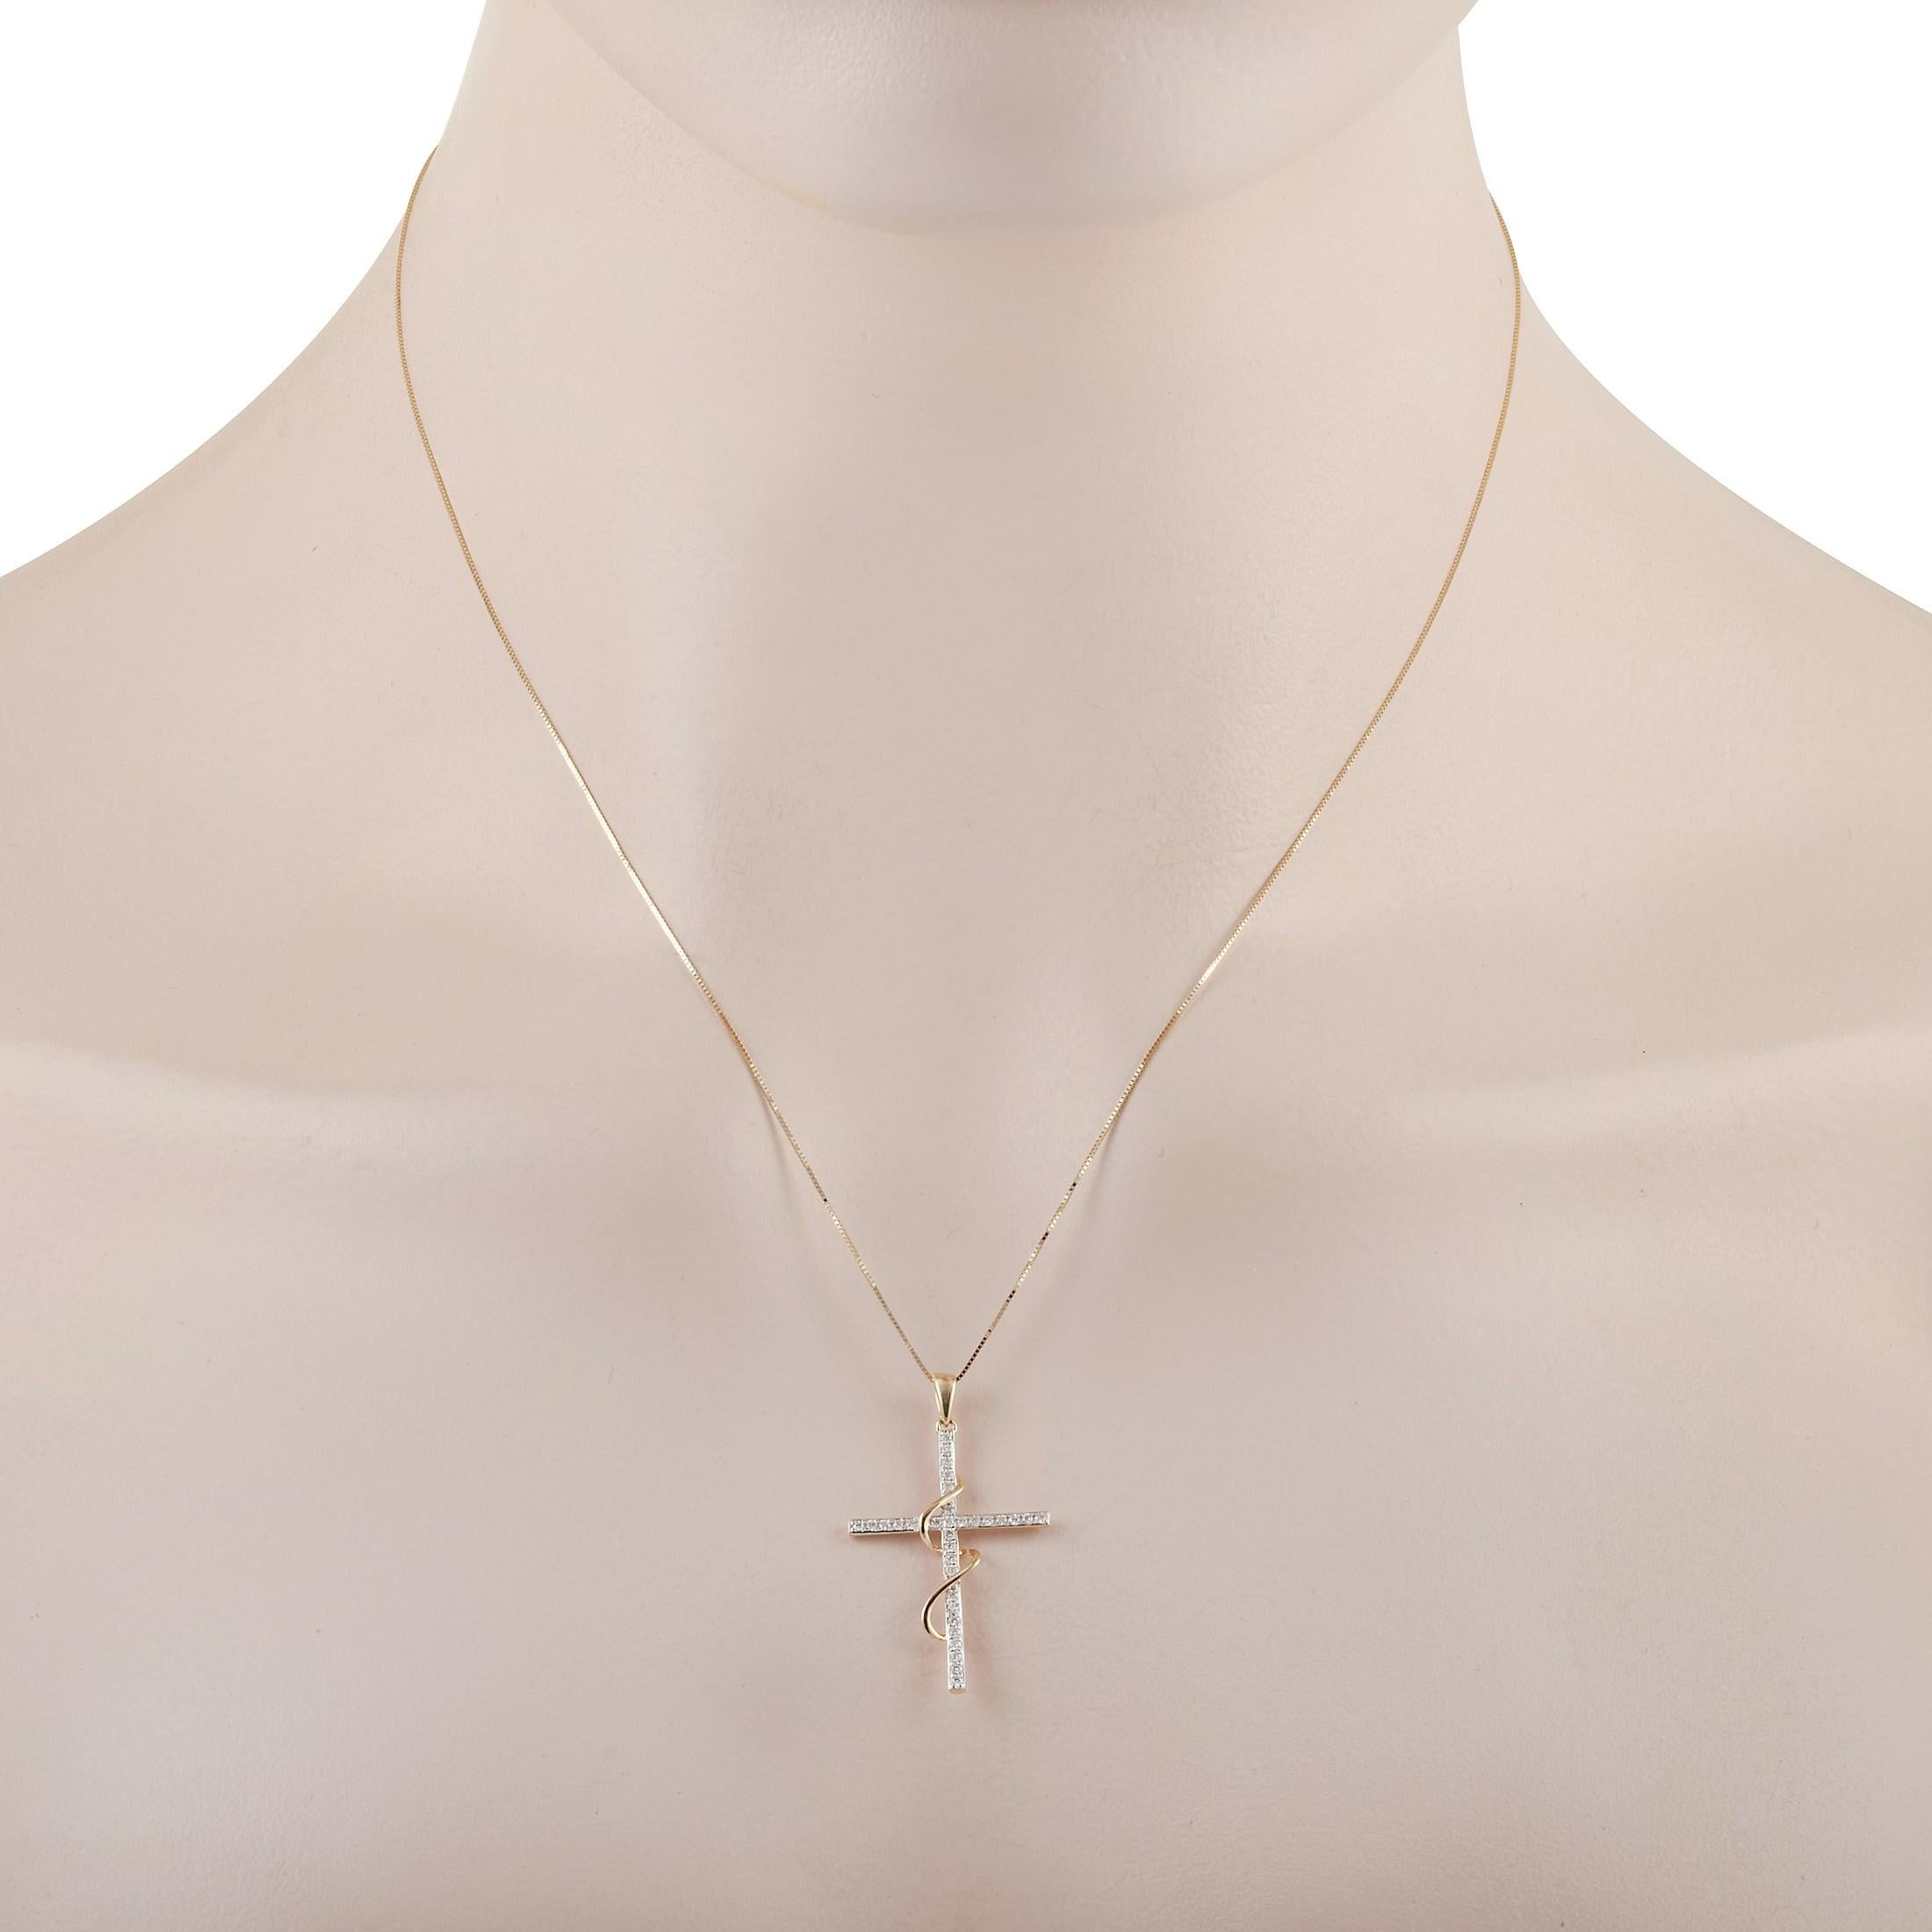 Display your commitment to your faith with this LB Exclusive 14K White and Yellow Gold 0.20 ct Diamond Cross Necklace. A sparkling symbol of your spirituality, this diamond cross necklace can also give your sense of fashion a heavenly glow. The